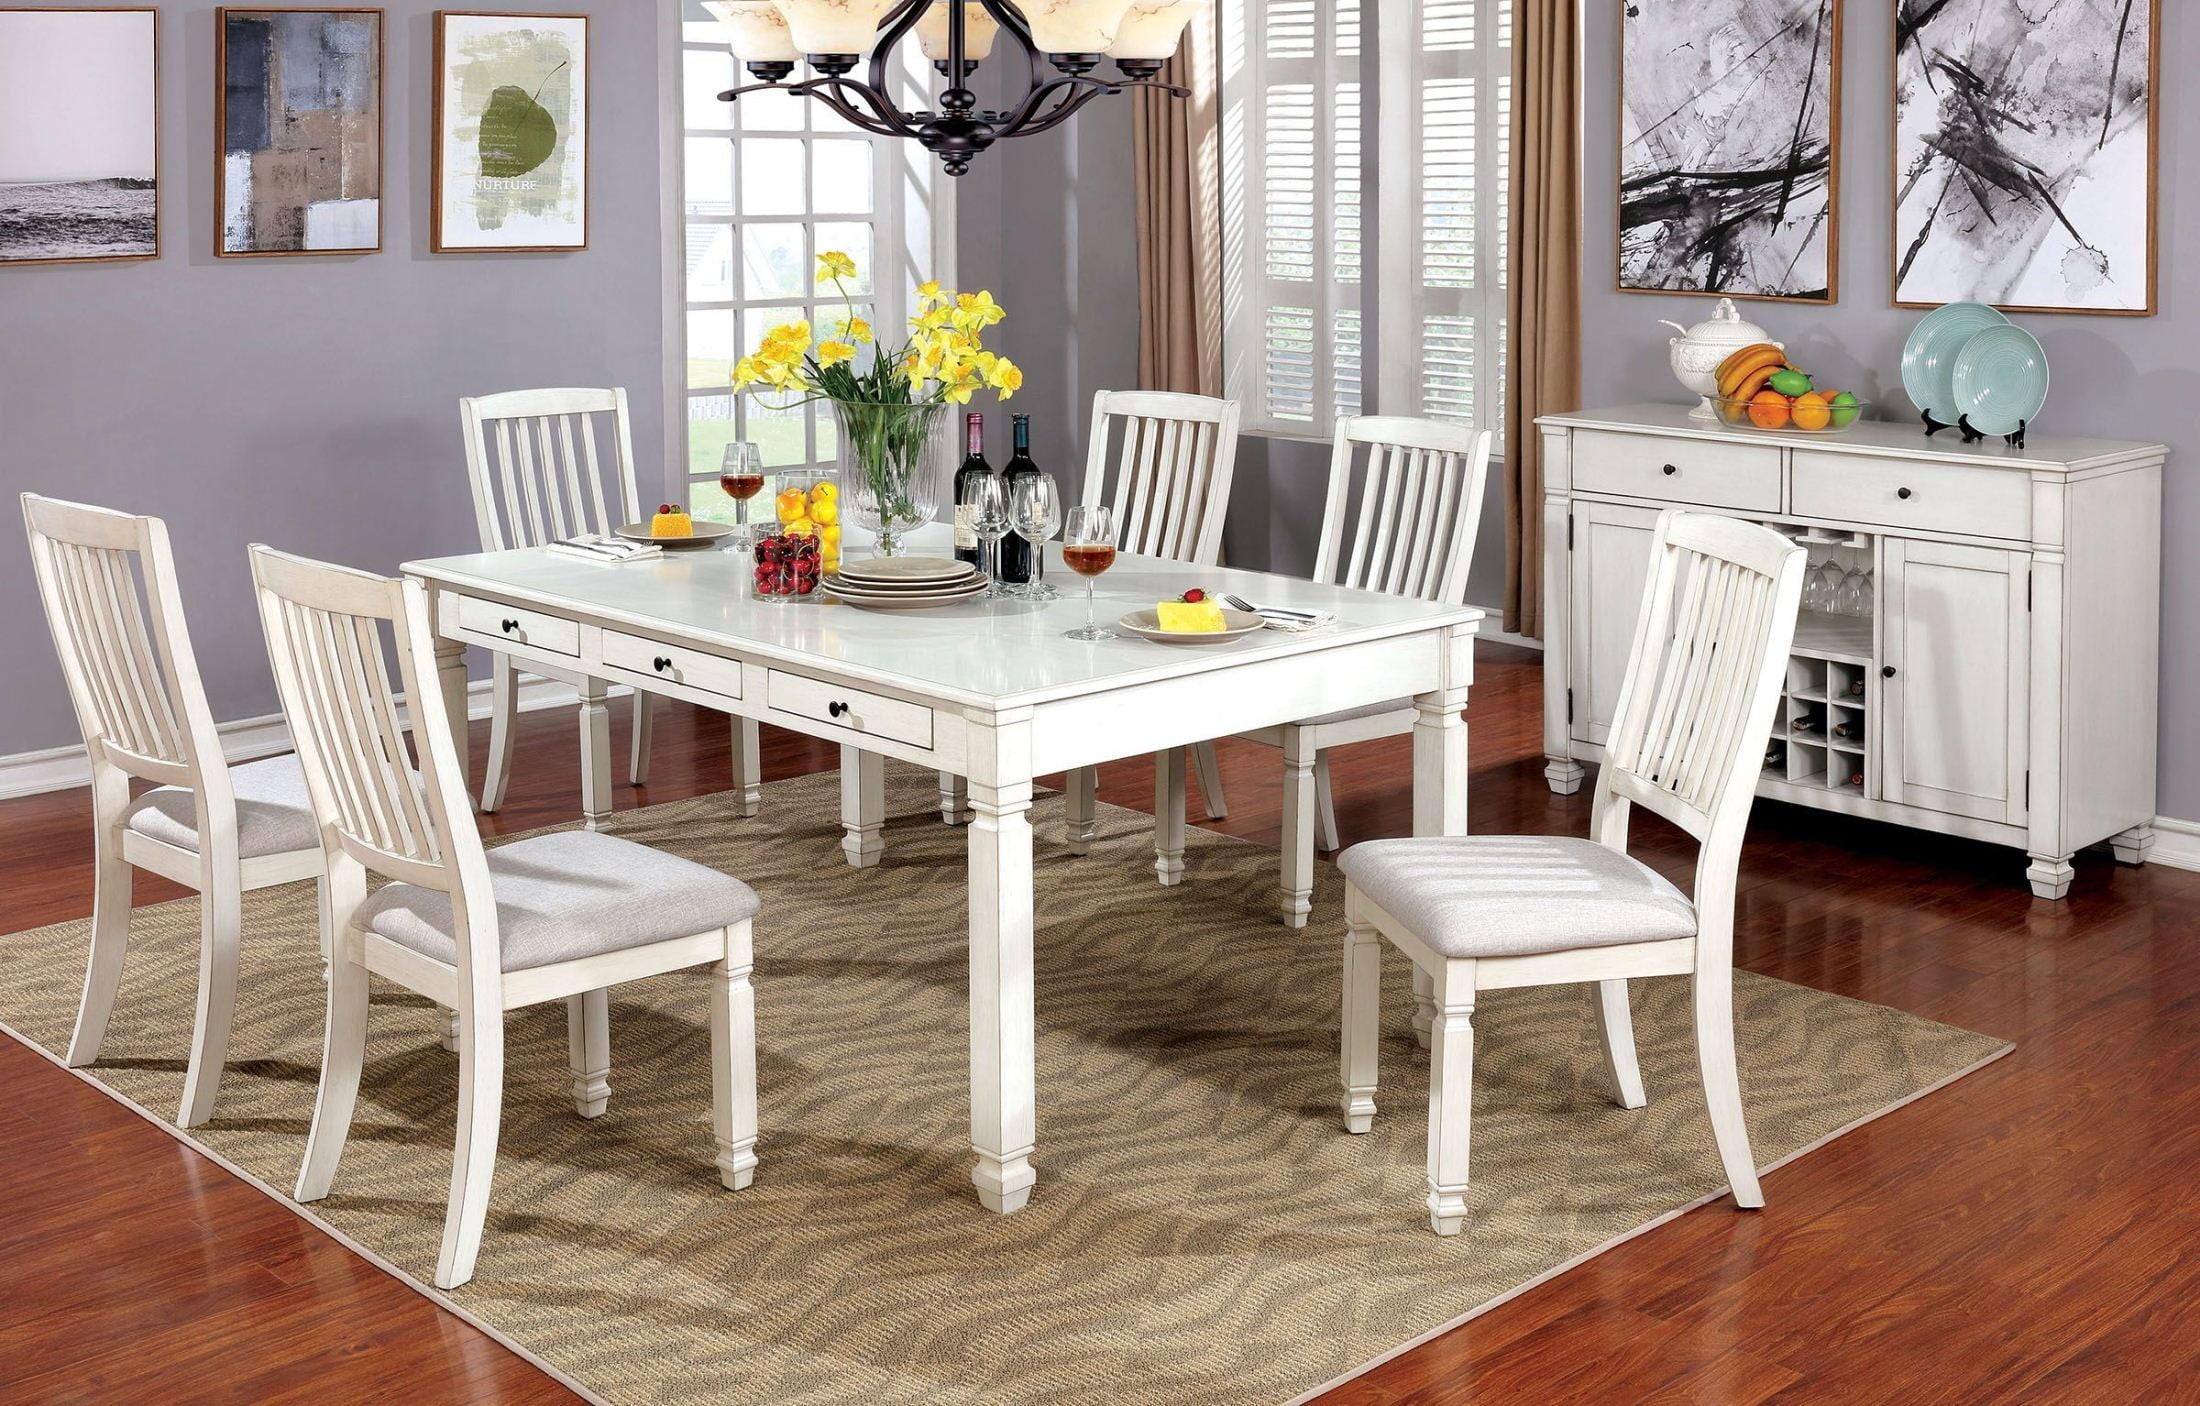 White Dining Room Table Elegant Centerpieces